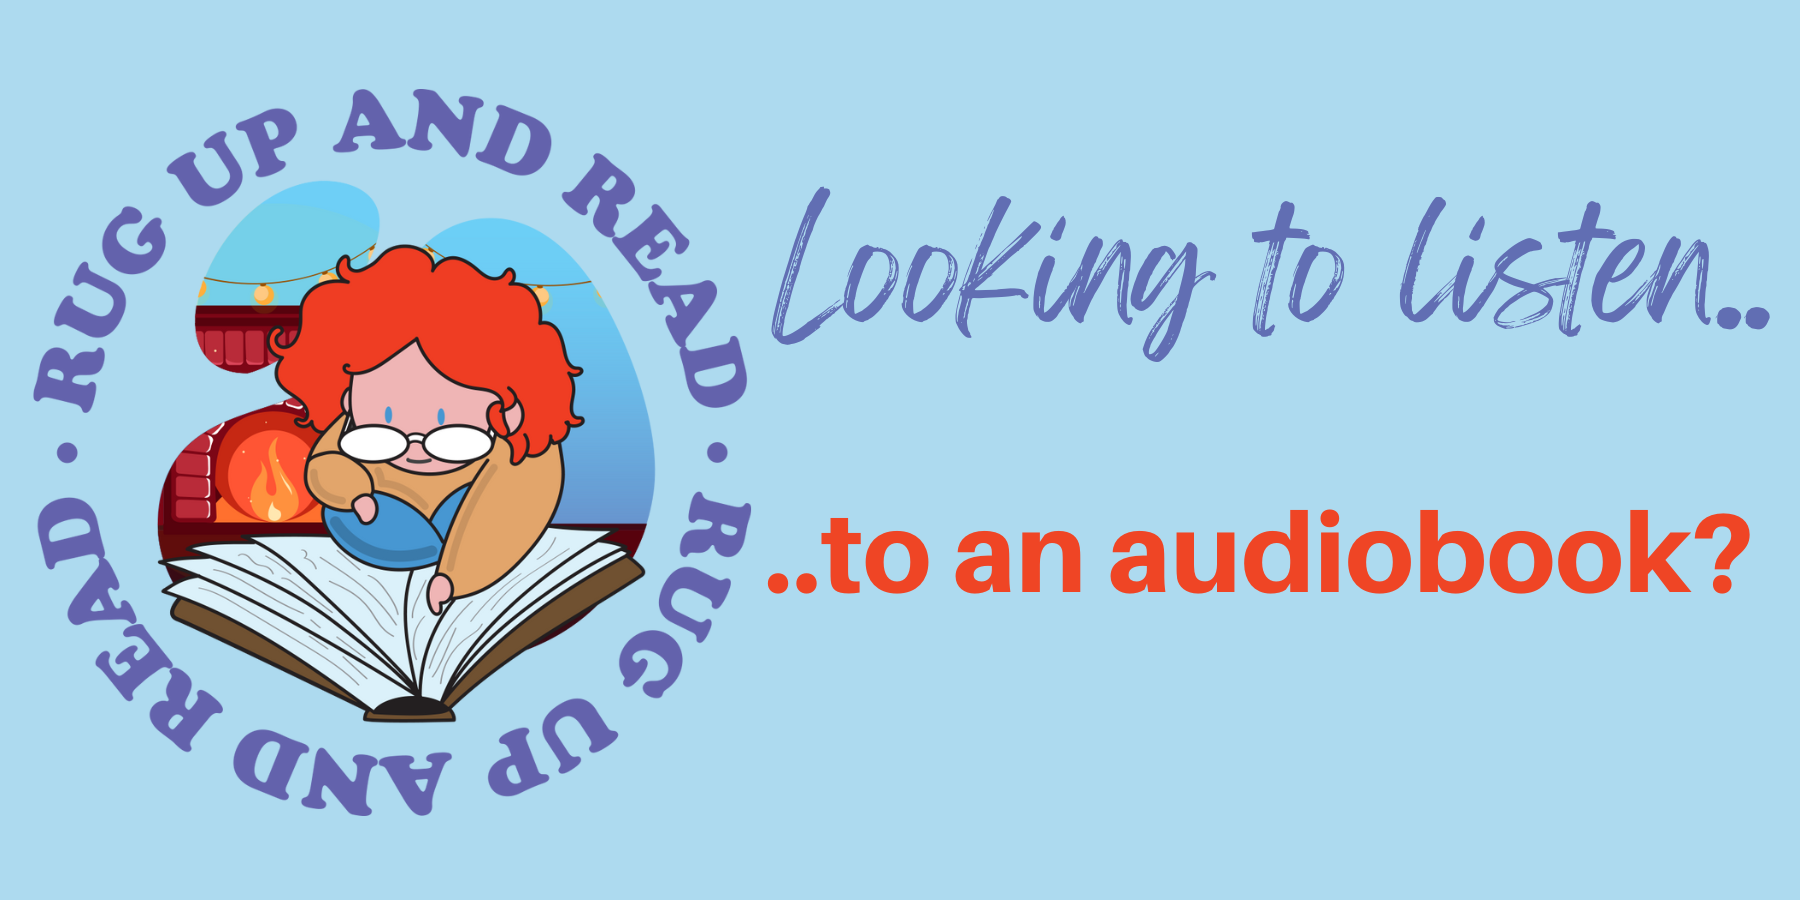 Looking to listen to an audiobook?